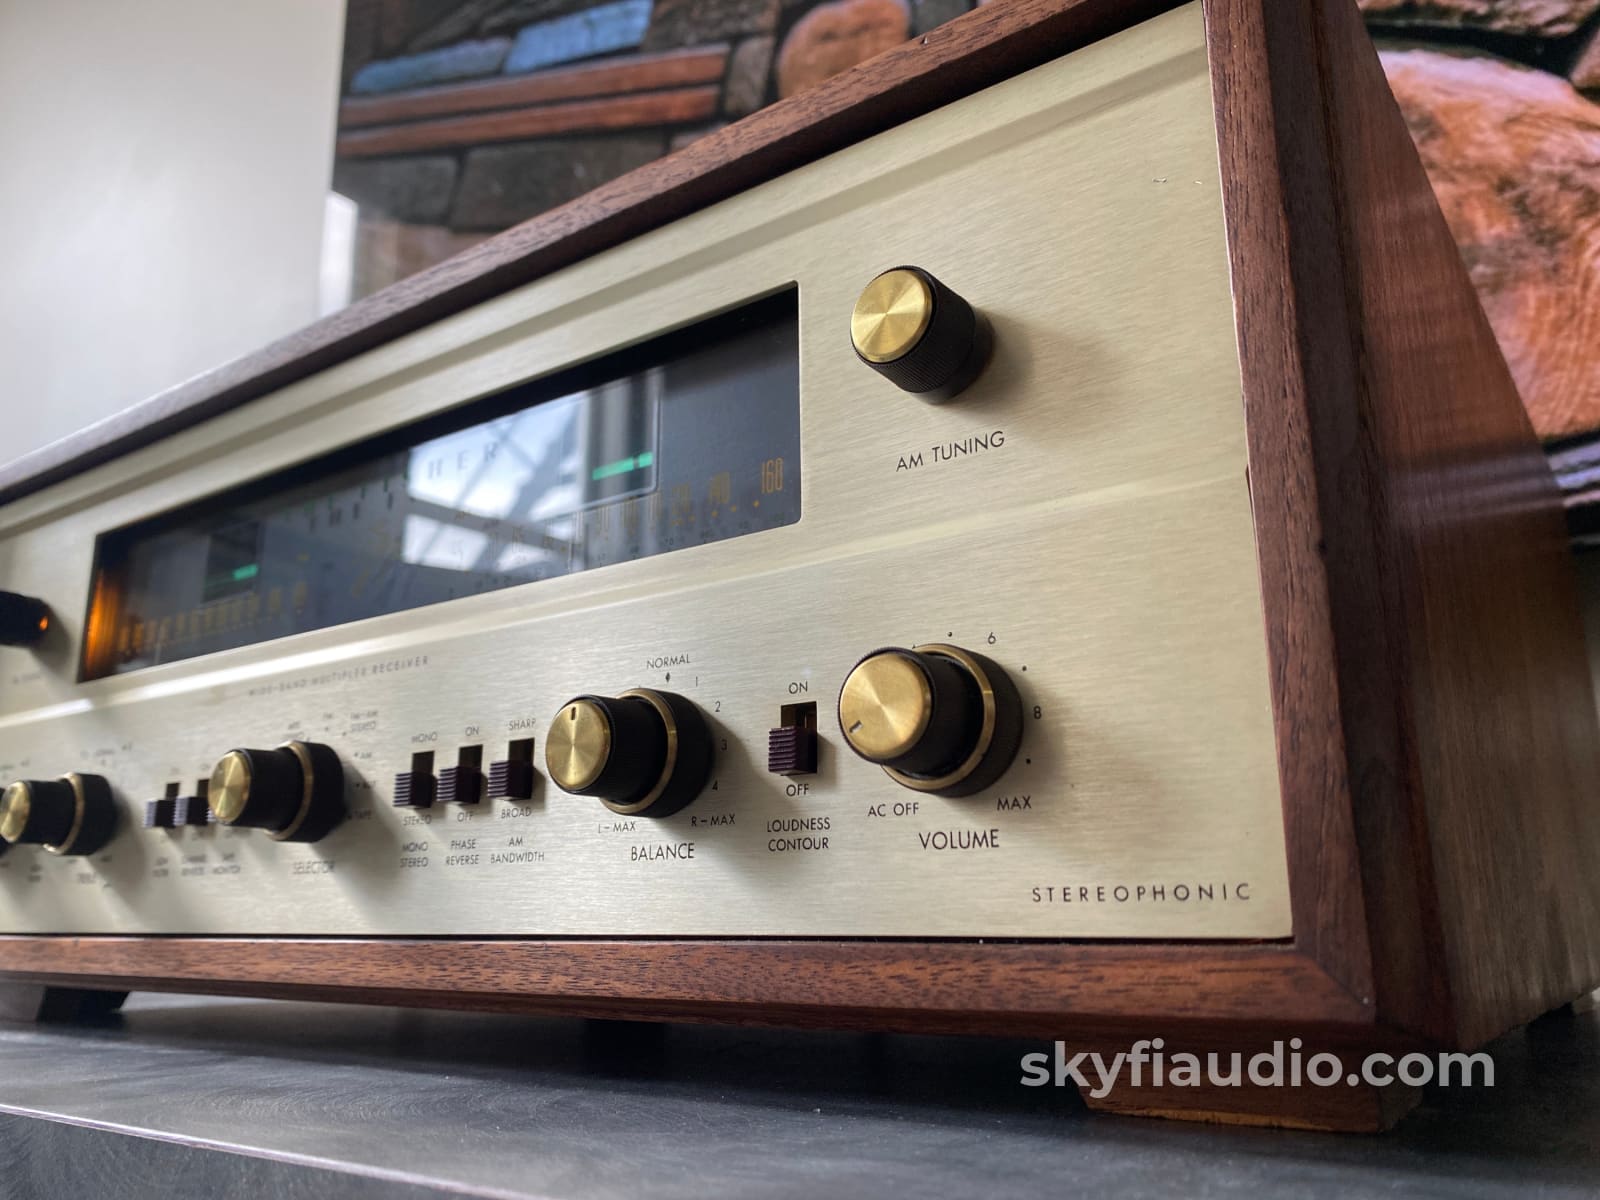 The Fisher 800-B - Fully Restored Am/Fm Tube Receiver Dual Magic Eyes! Integrated Amplifier